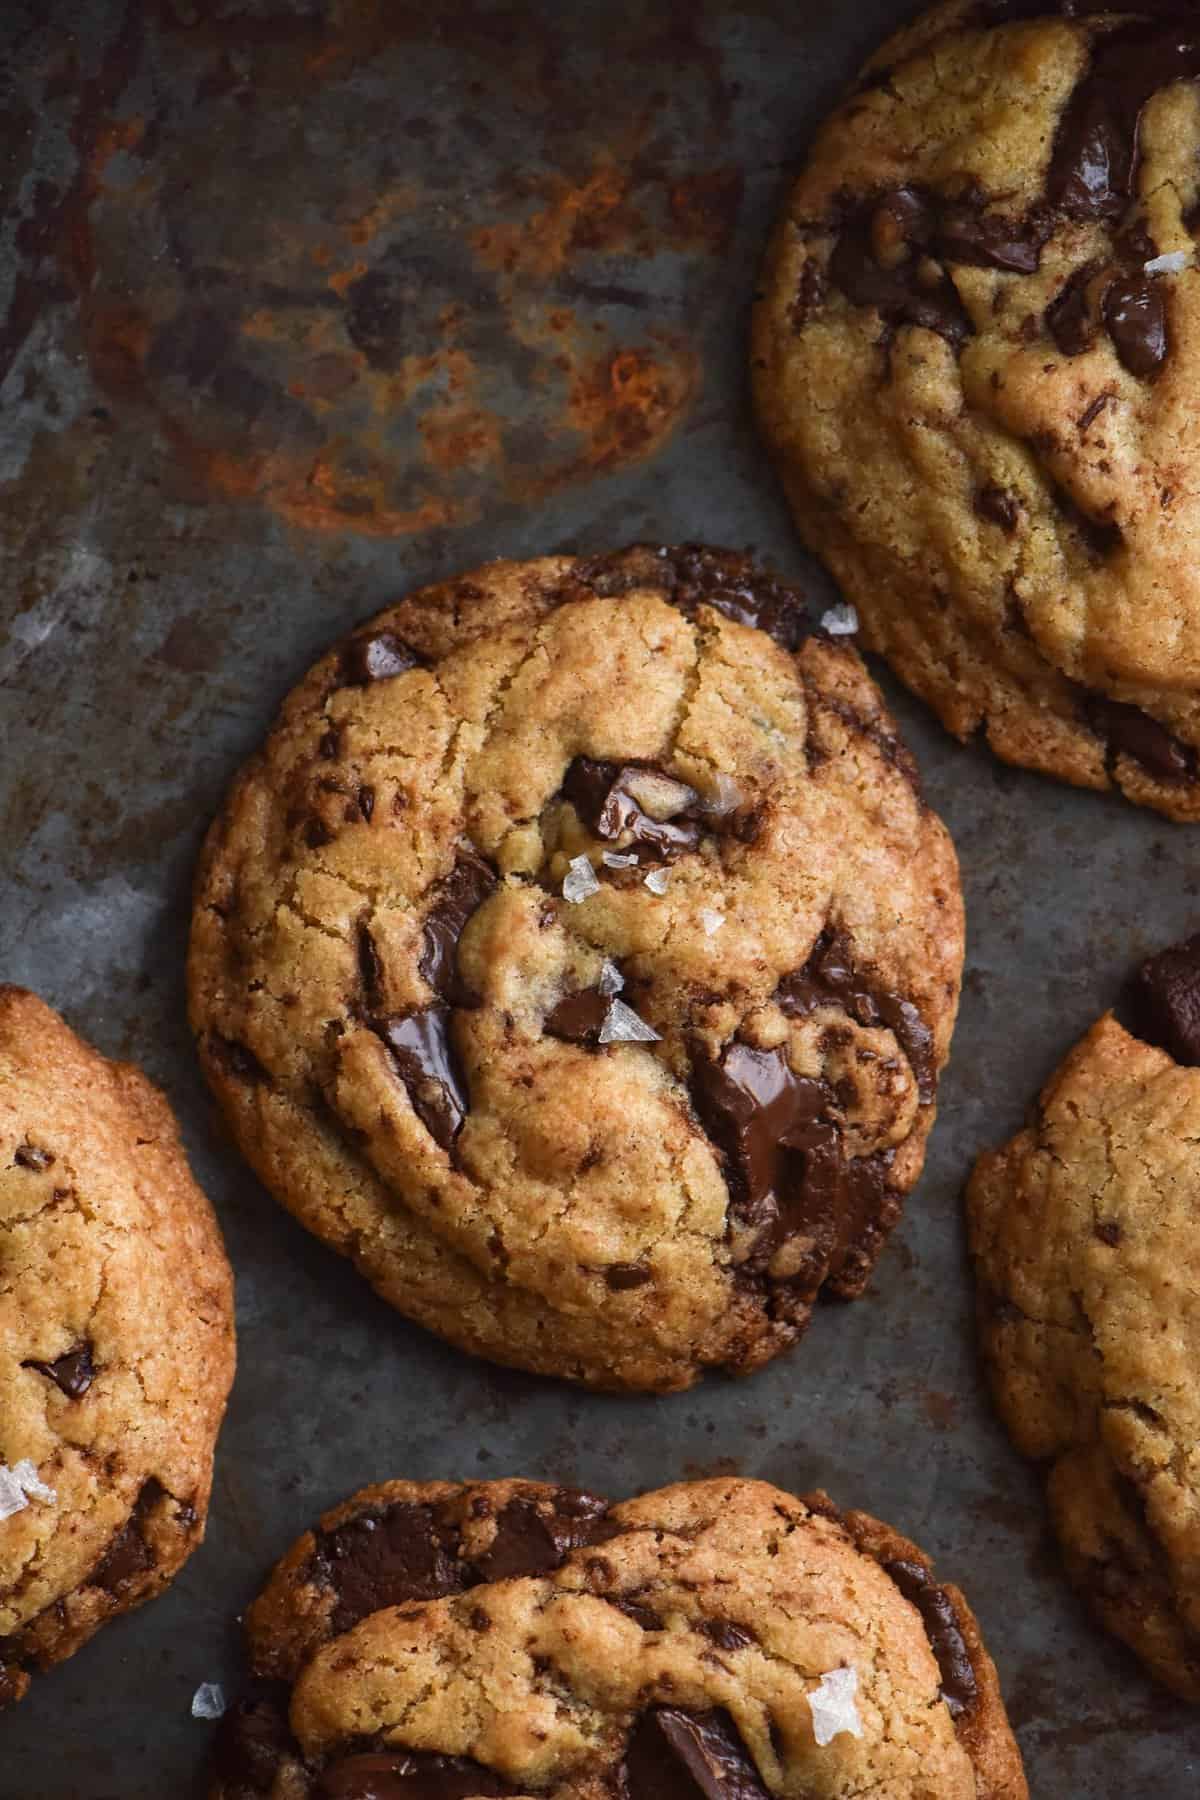 An aerial view of gluten-free vegan choc-chip cookies on a moody, mottled and rusted grey backdrop. The cookies are speckled with melted chocolate and sea salt flakes